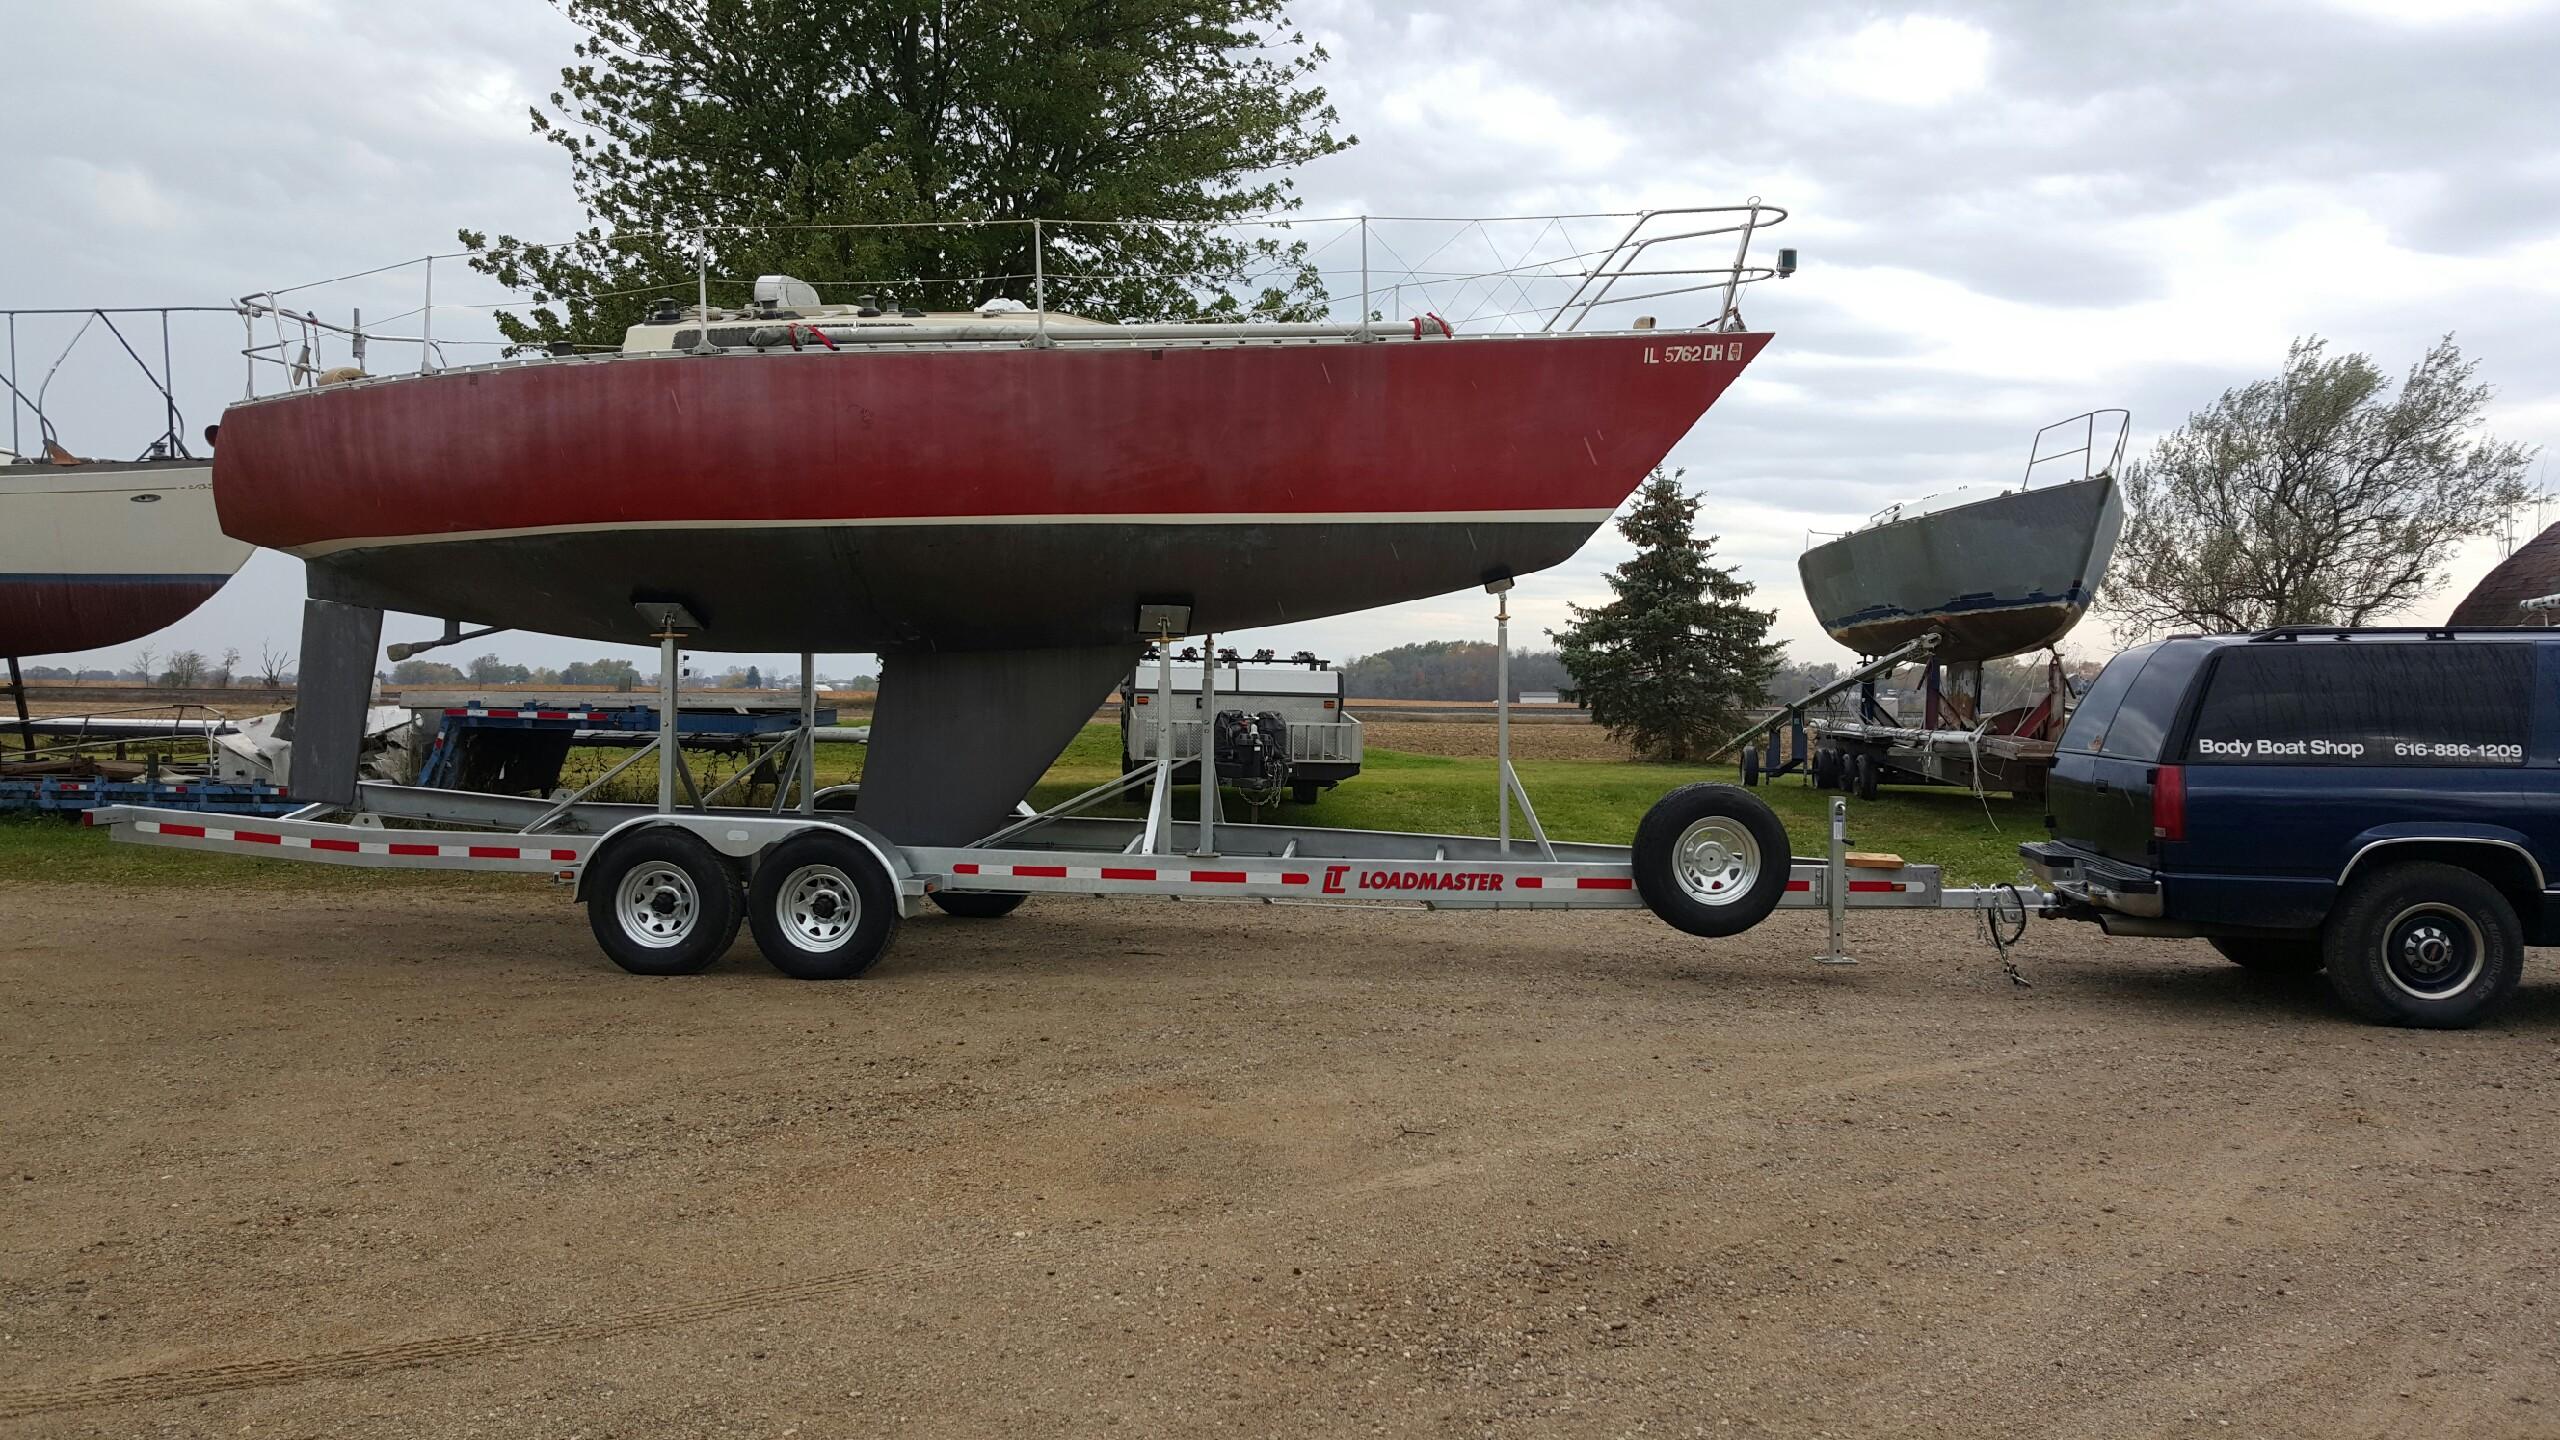 24 foot sailboat trailer for sale